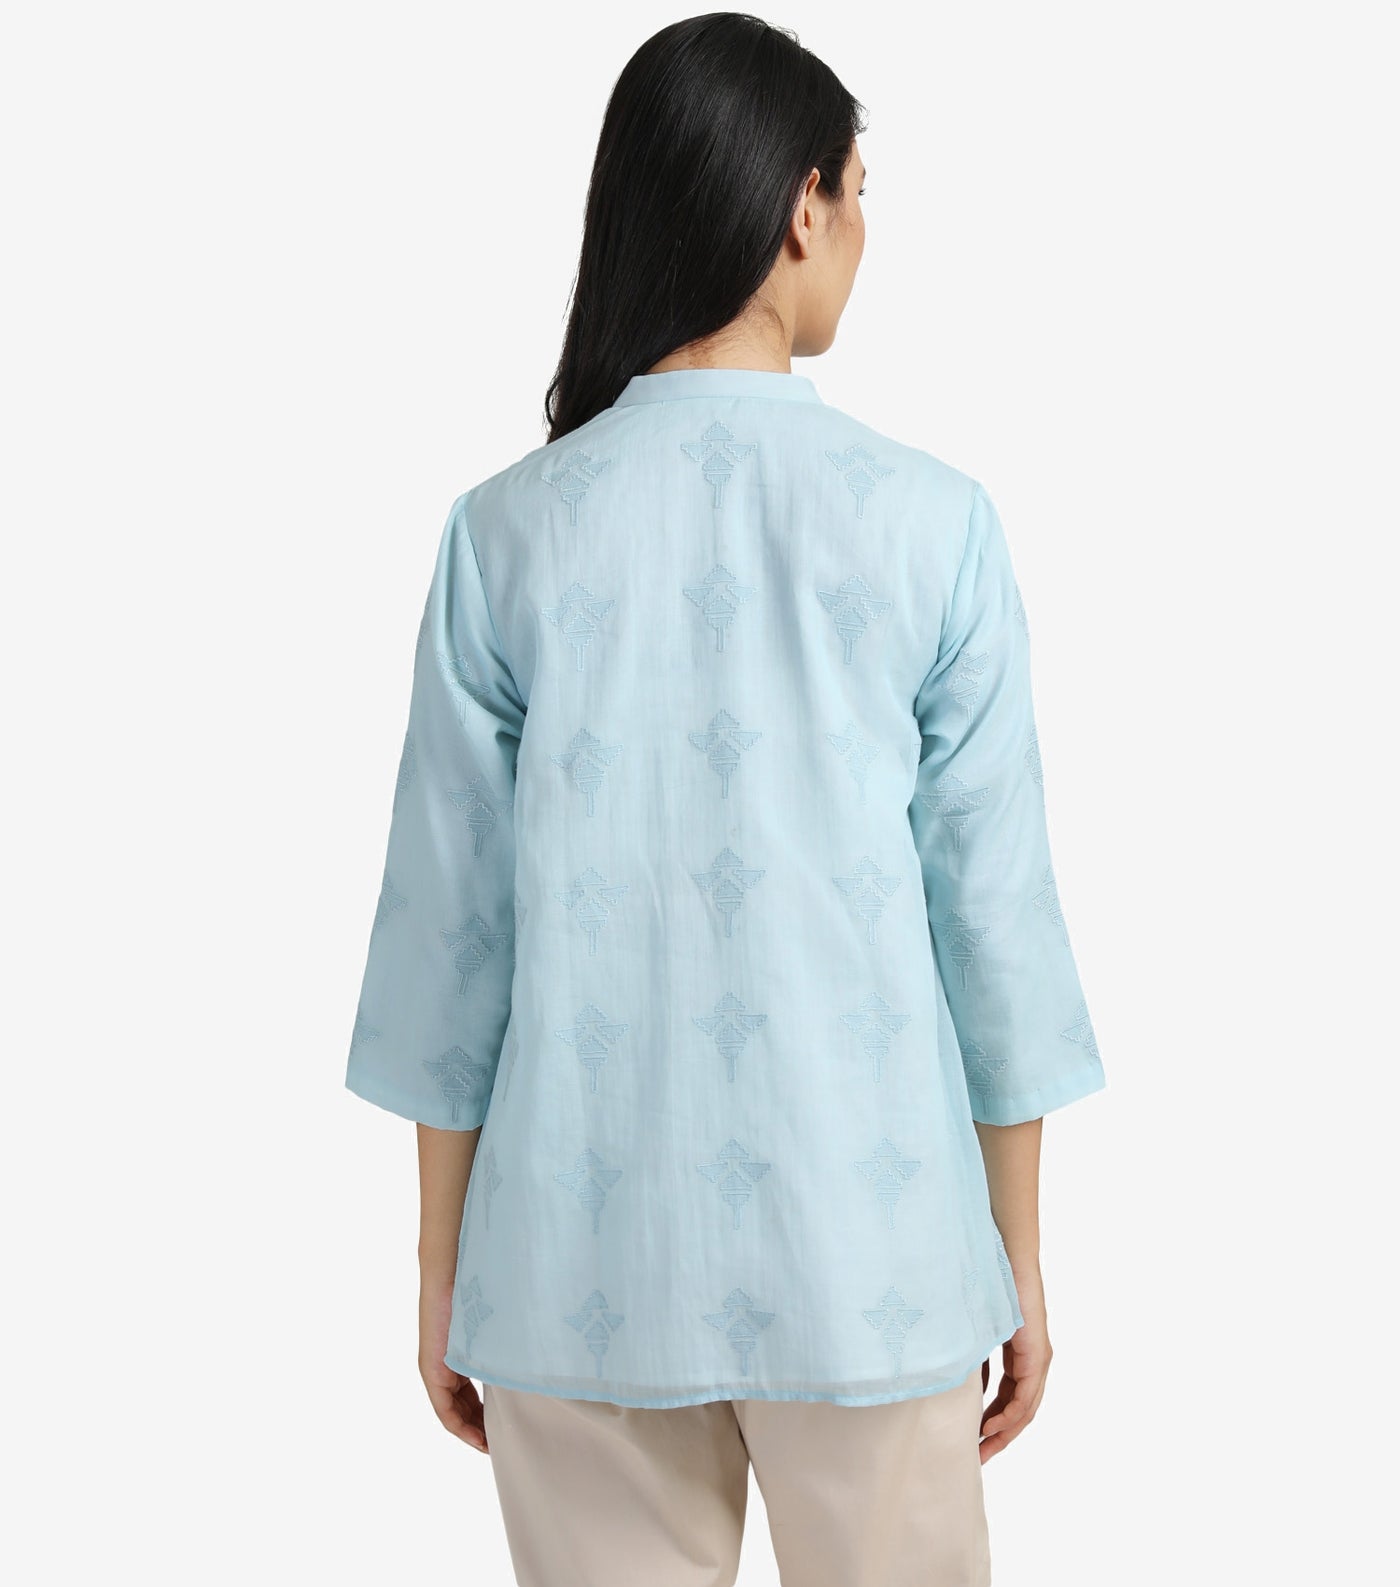 Skyblue embroidered cotton shirt